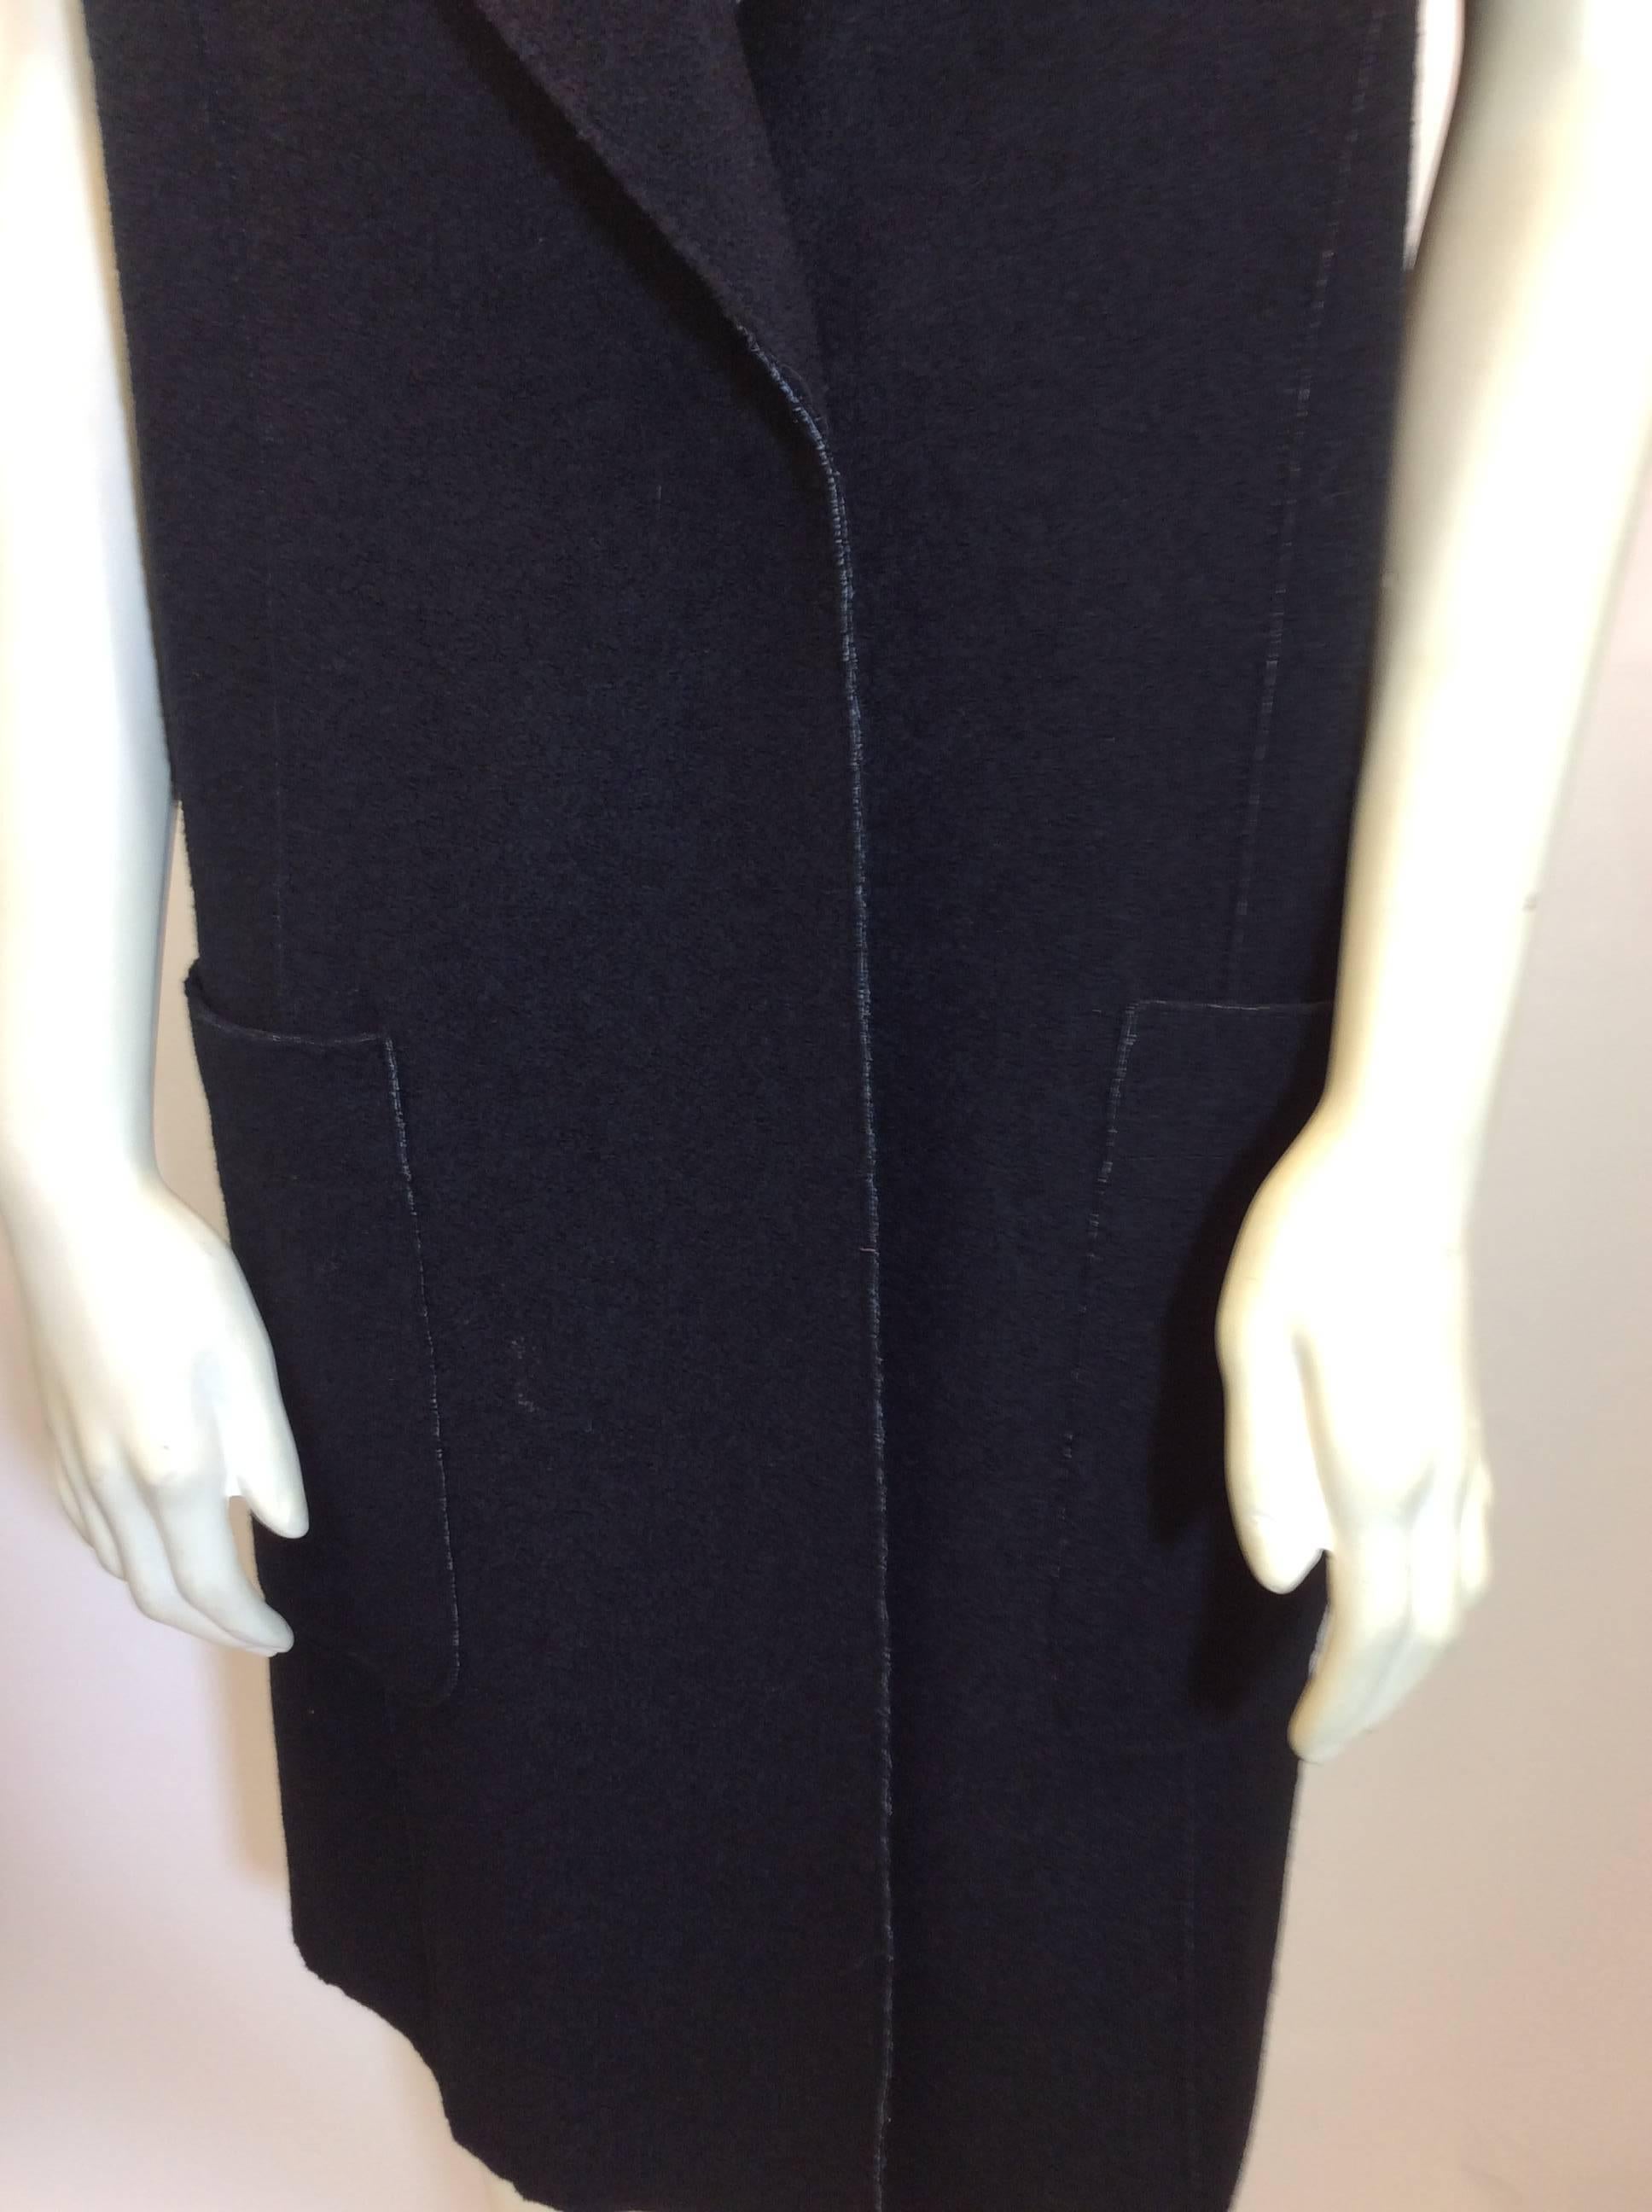 Marccain Black Boiled Wool Waistcoat In Excellent Condition For Sale In Narberth, PA